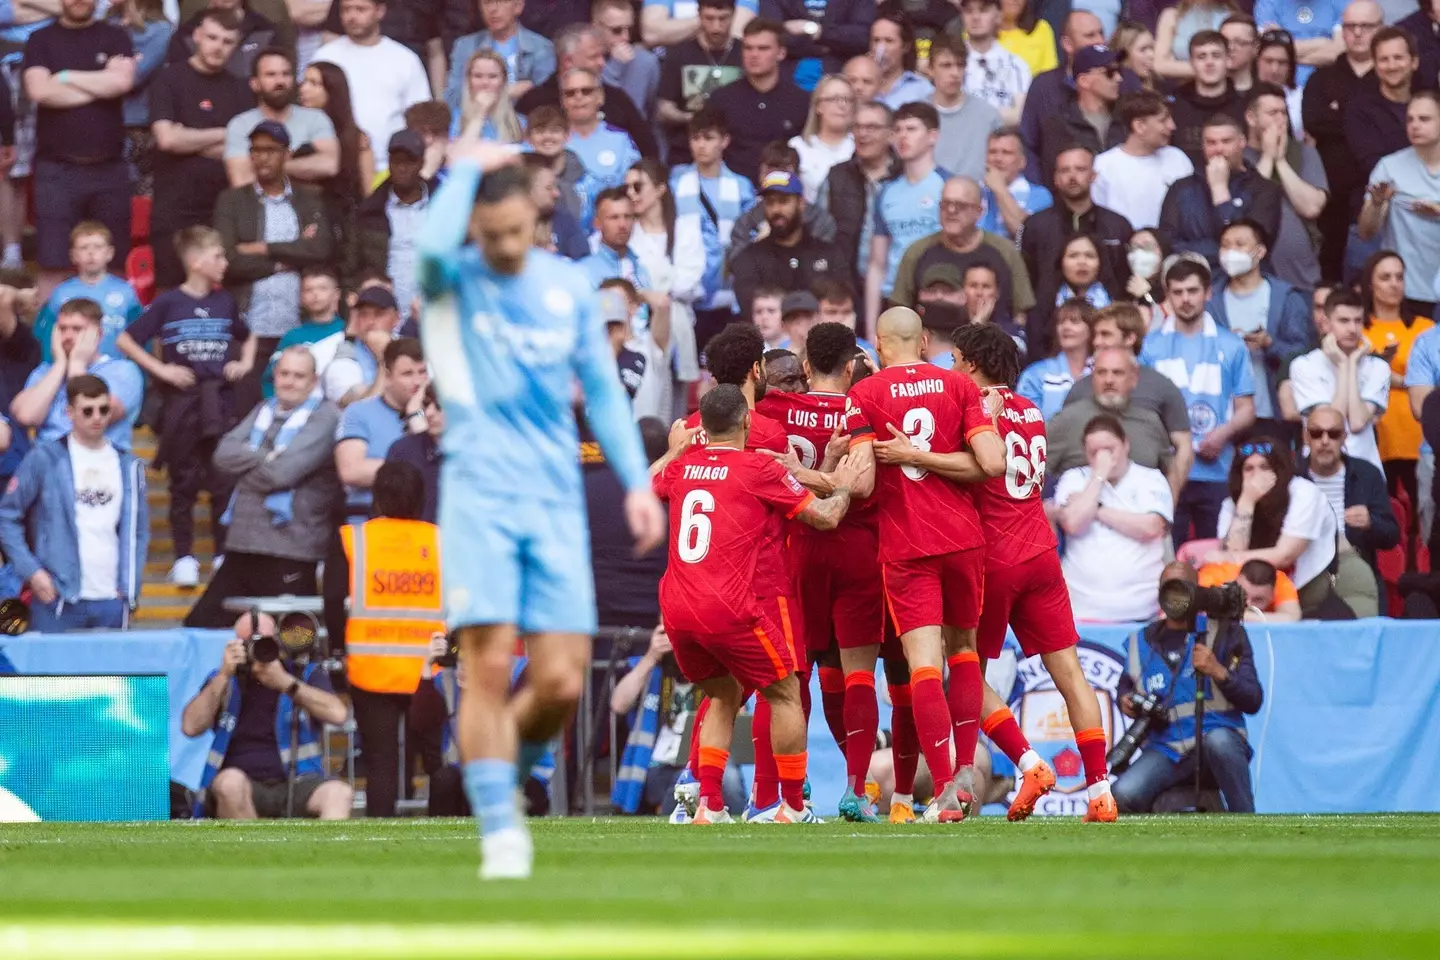 Liverpool players celebrate leaving City dejected. Image: PA Images